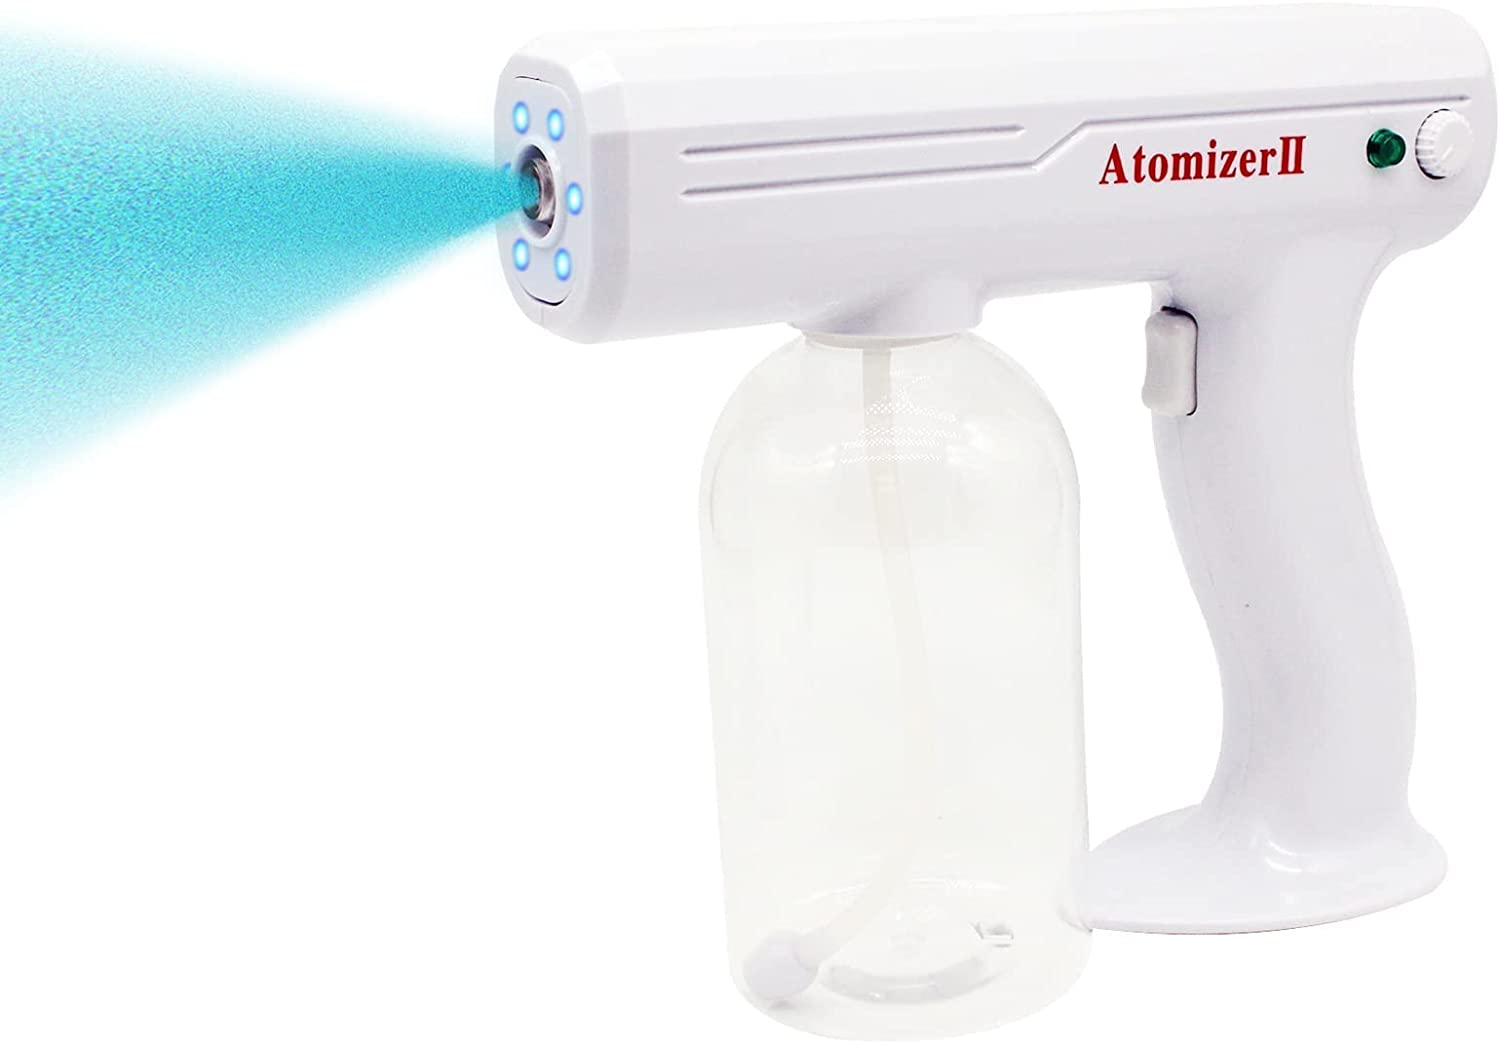 Atomizer II Portable Chargeable Spray Gun | Supply Master | Accra, Ghana Janitorial & Cleaning Buy Tools hardware Building materials